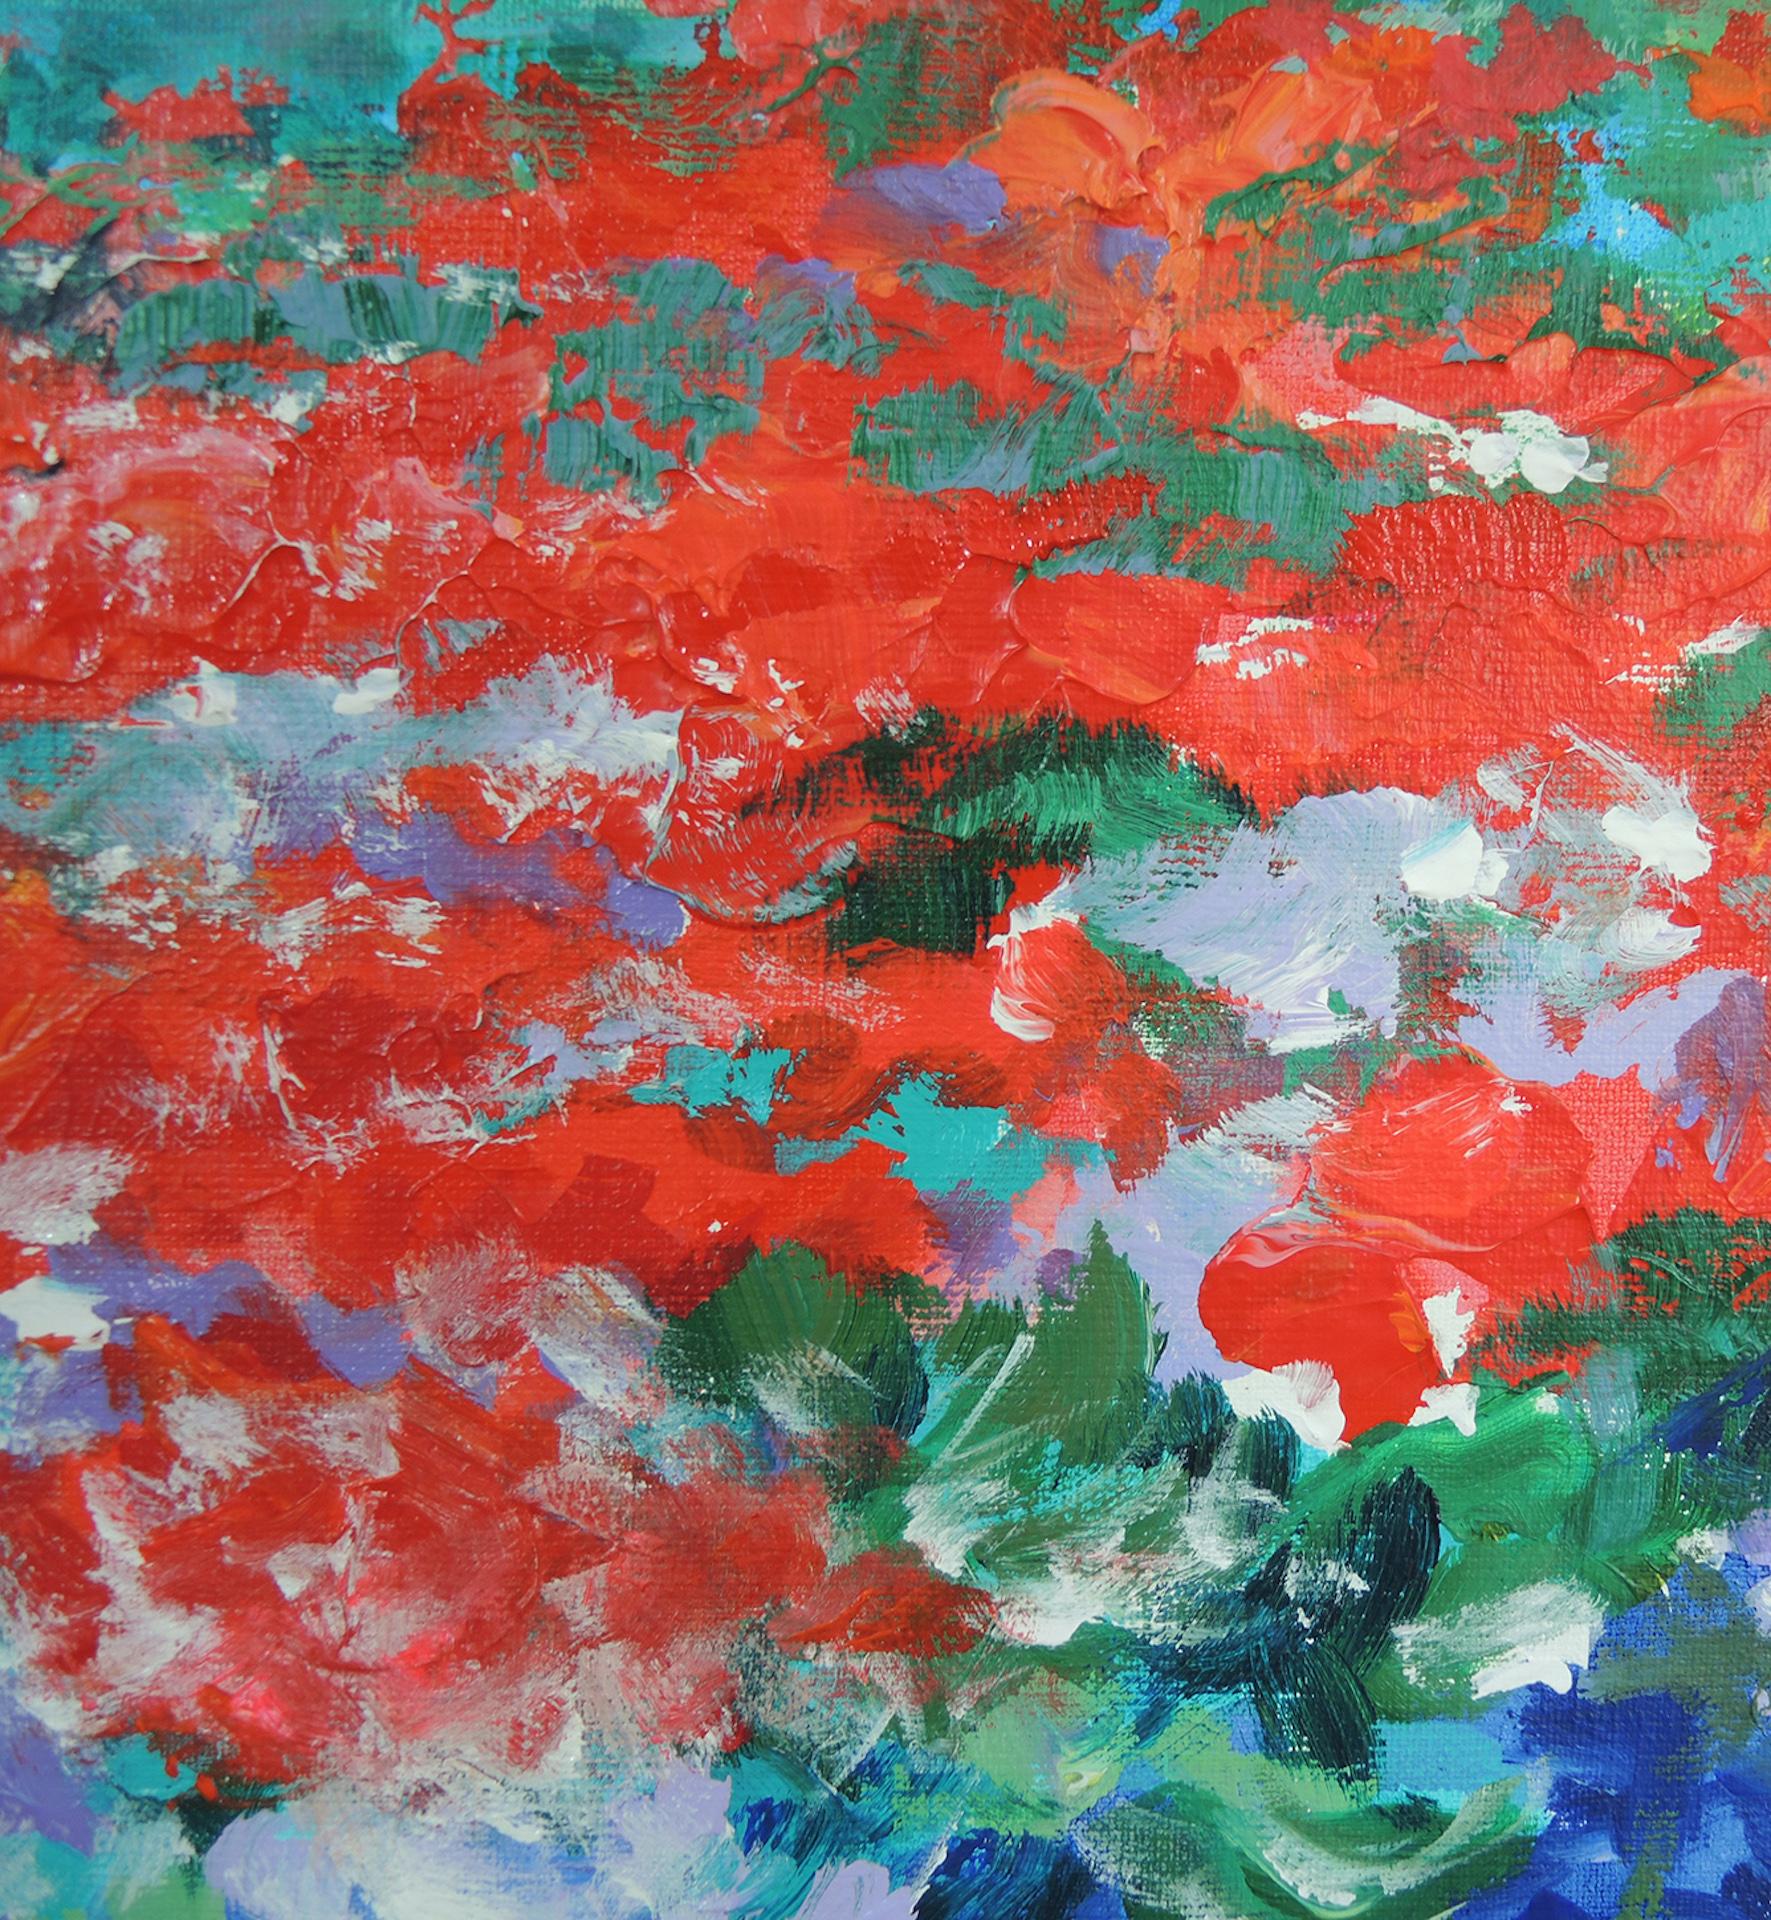 Mary Chaplin
The Geranium Season at Claude Monet’s House
Acrylic on Linen Canvas
Size: H 81cm x W 100cm x D 2cm
Sold Unframed
(Please note that in situ images are purely an indication of how a piece may look).

This is one of my favourite gardens